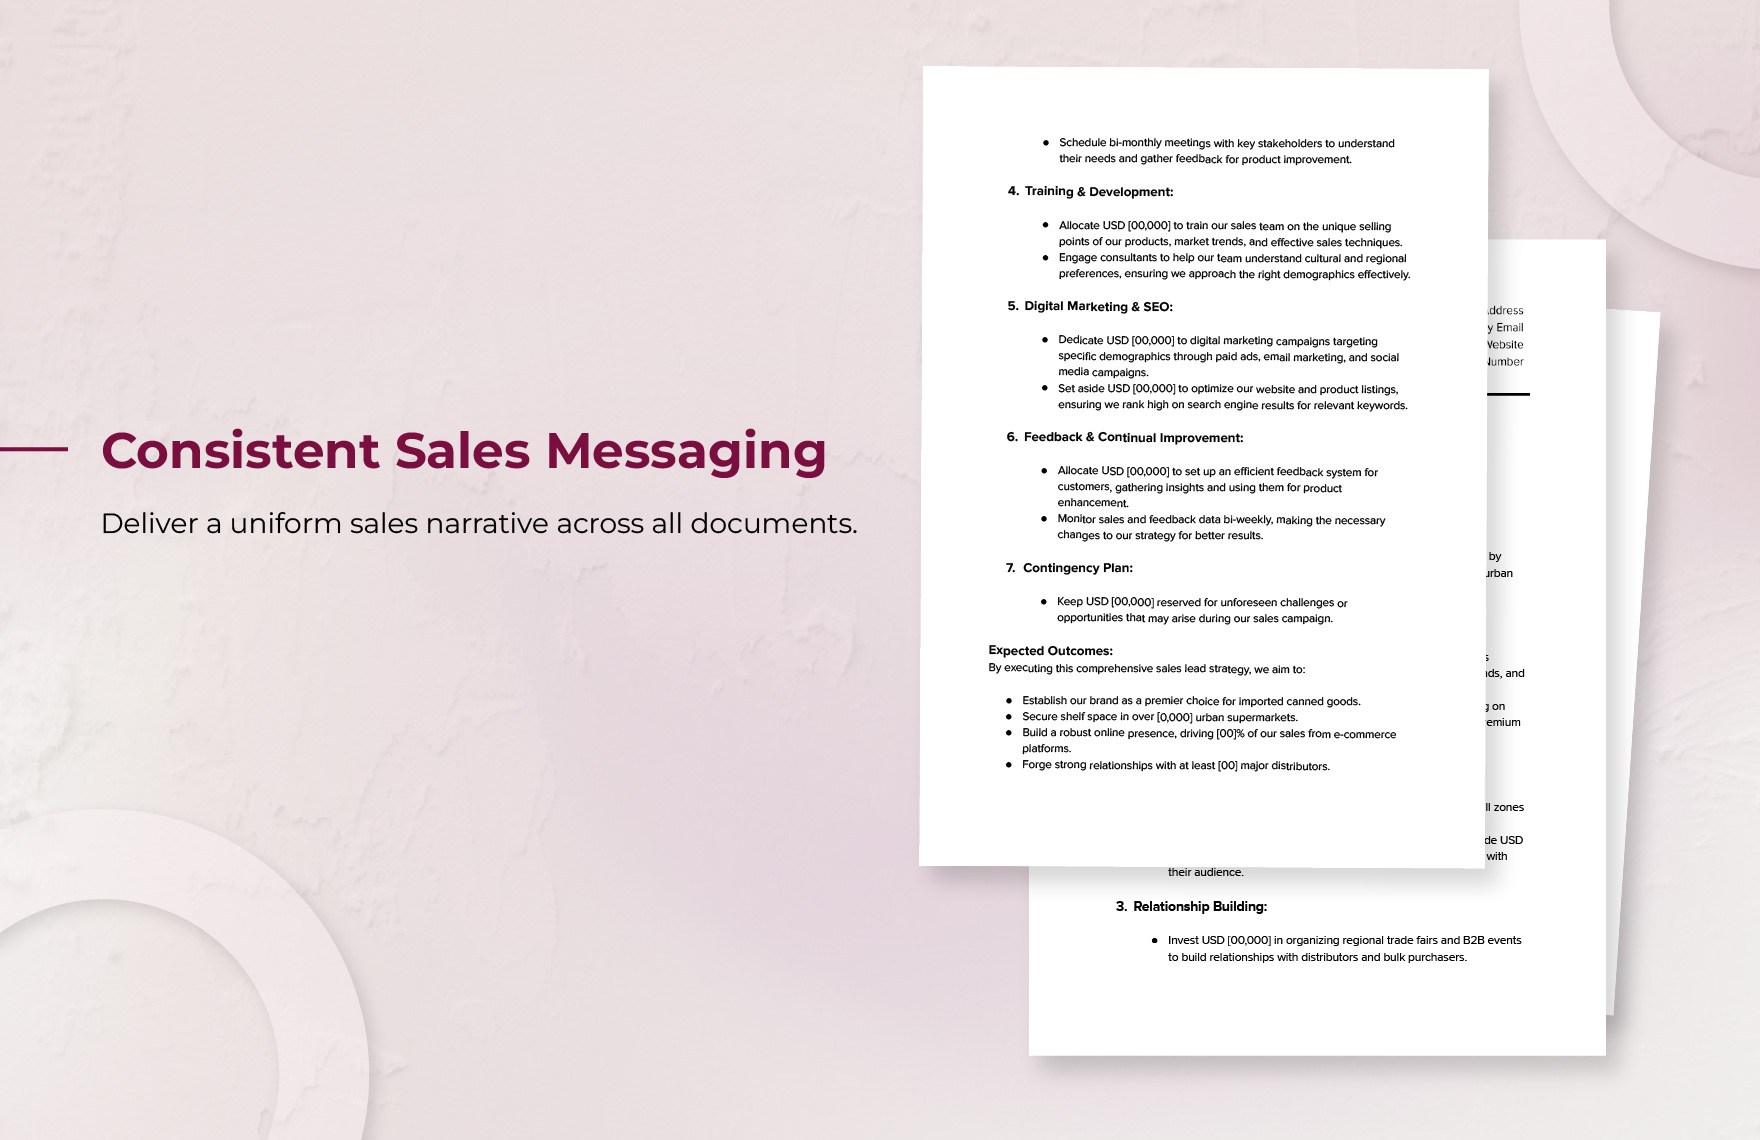 Sales Lead Strategy Statement Template